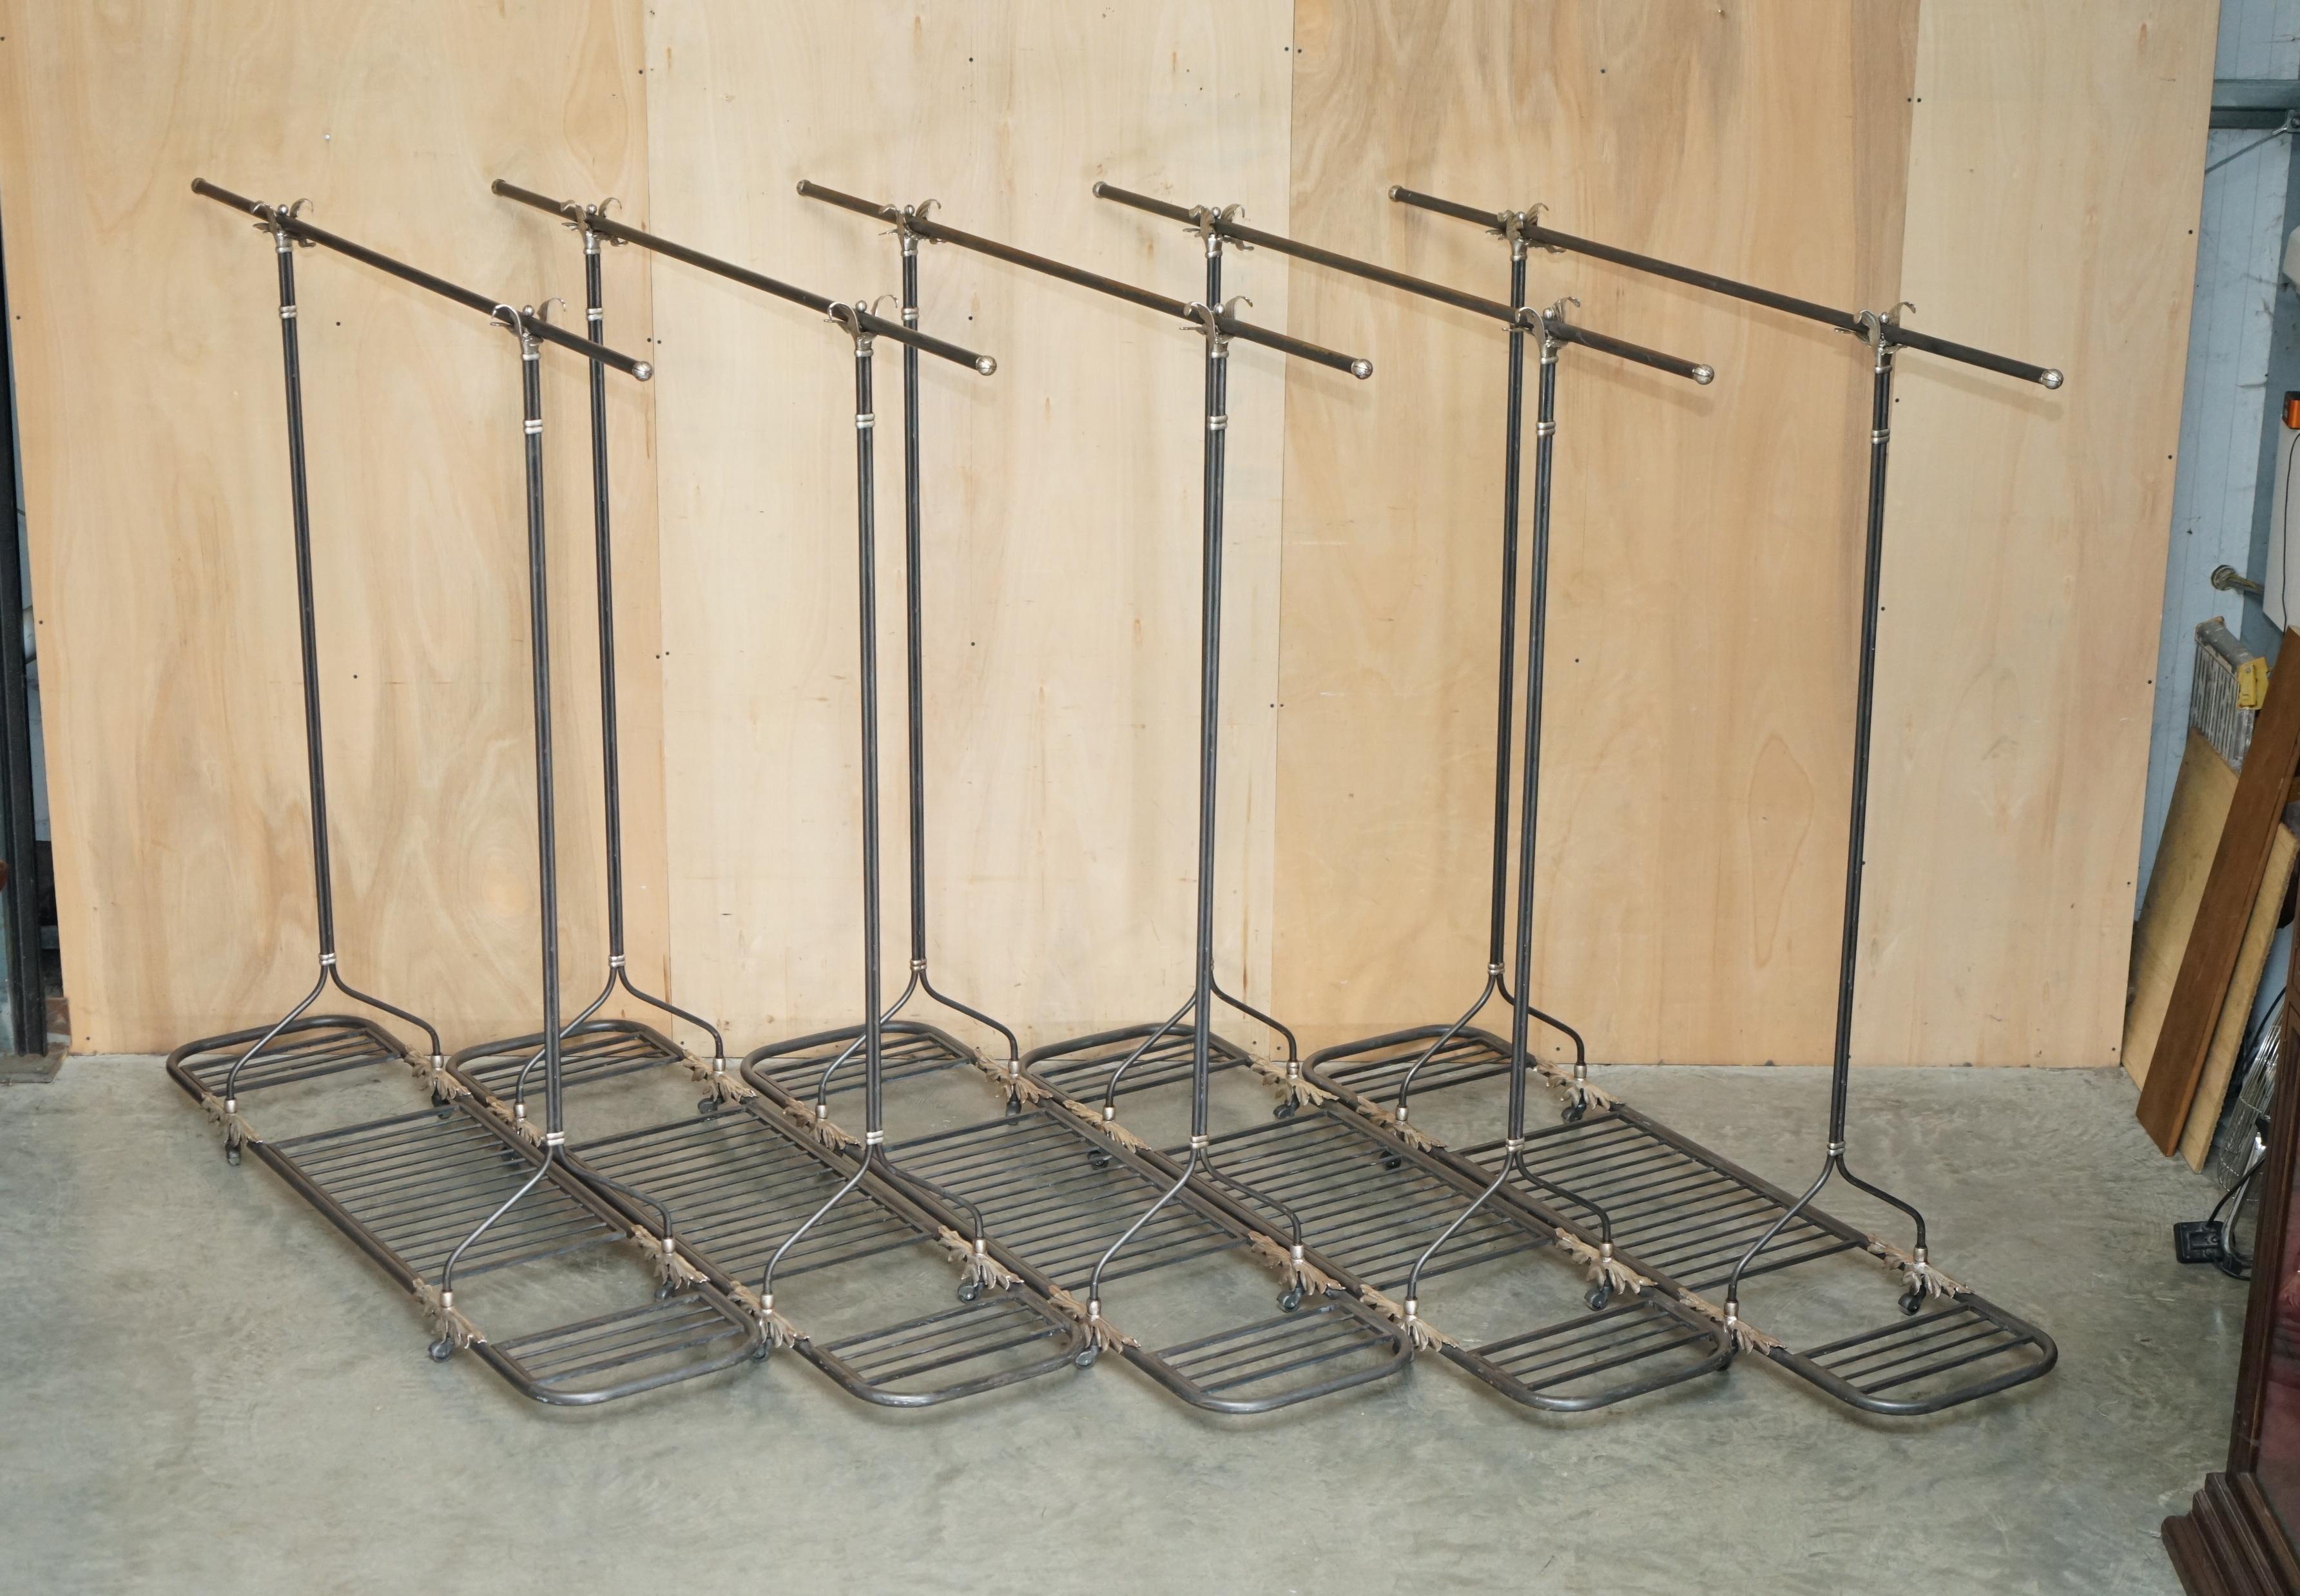 Royal House Antiques

Royal House Antiques is delighted to offer for sale 1 of 5 Dolce & Gabbana retail shop display rails from Bond Street London

Please note the delivery fee listed is just a guide, it covers within the M25 only for the UK and